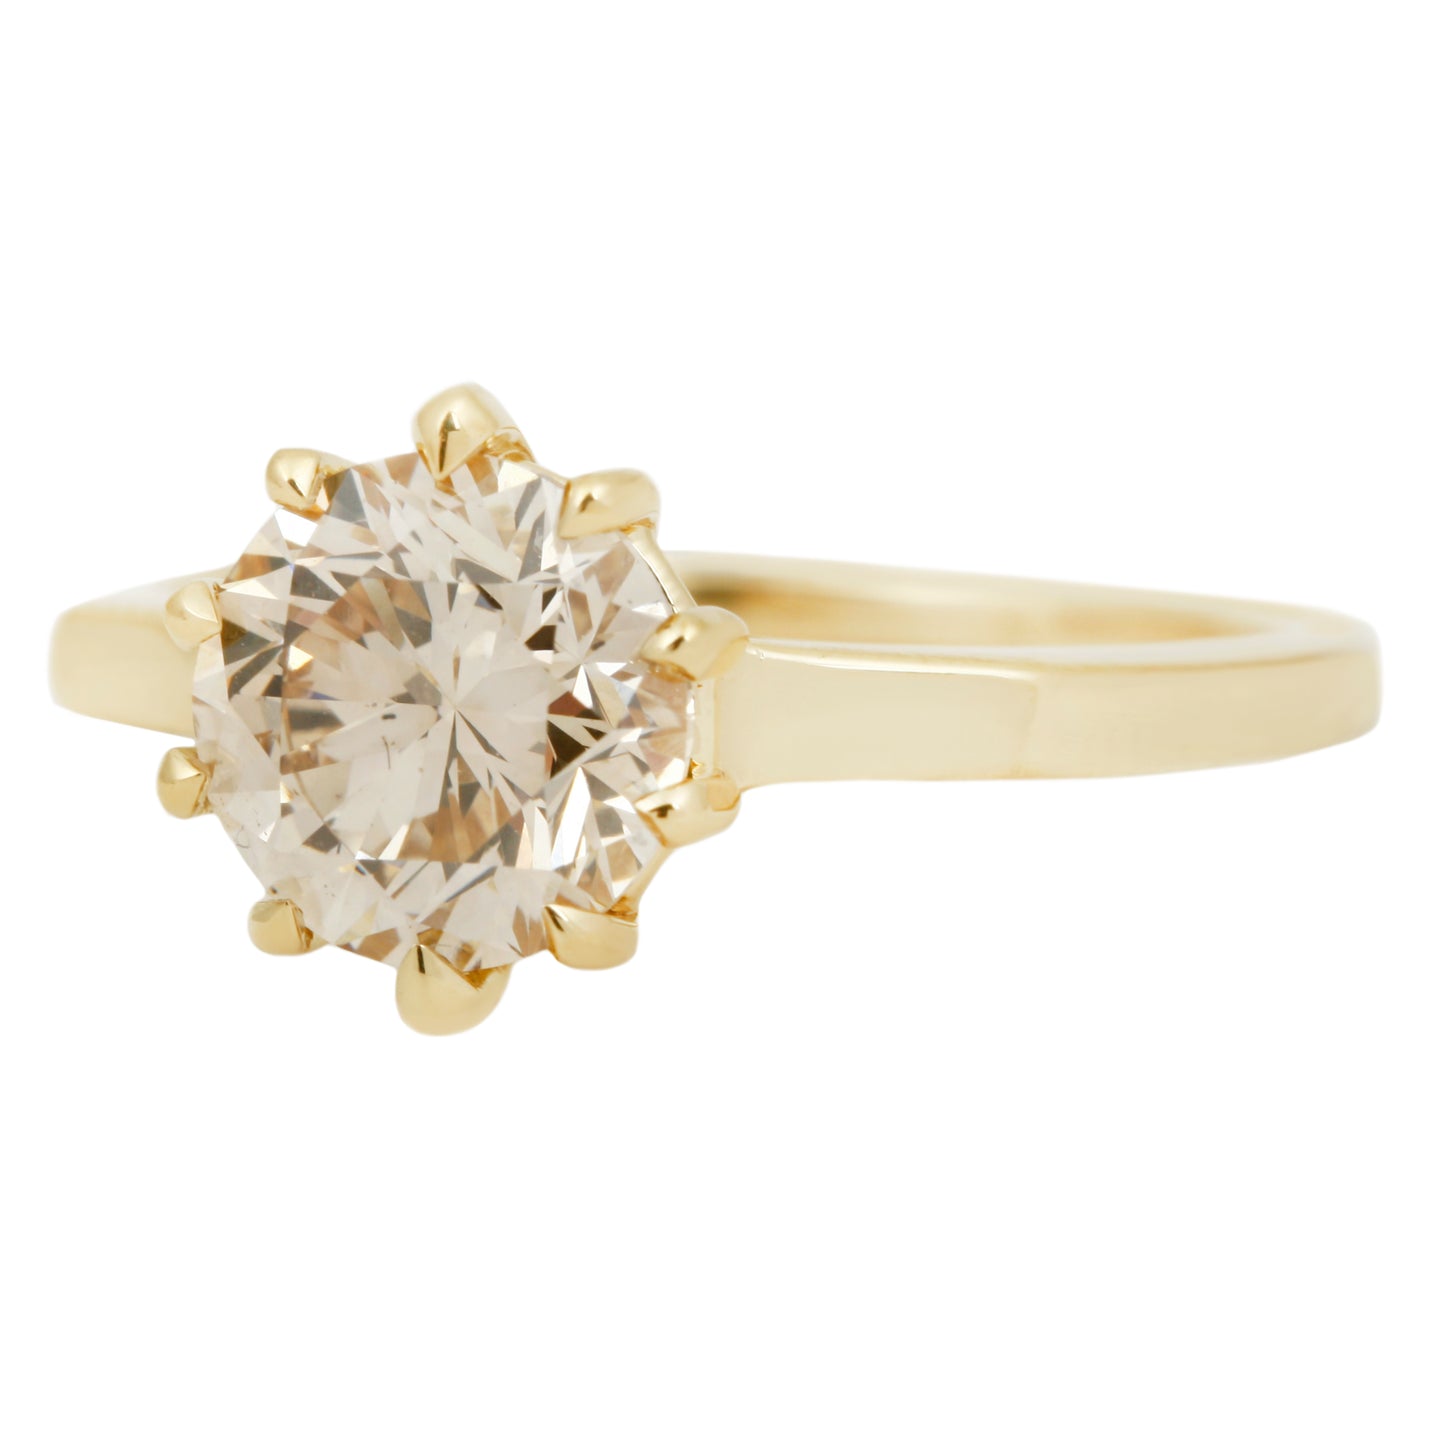 Hall of Mirrors Solitaire Ring